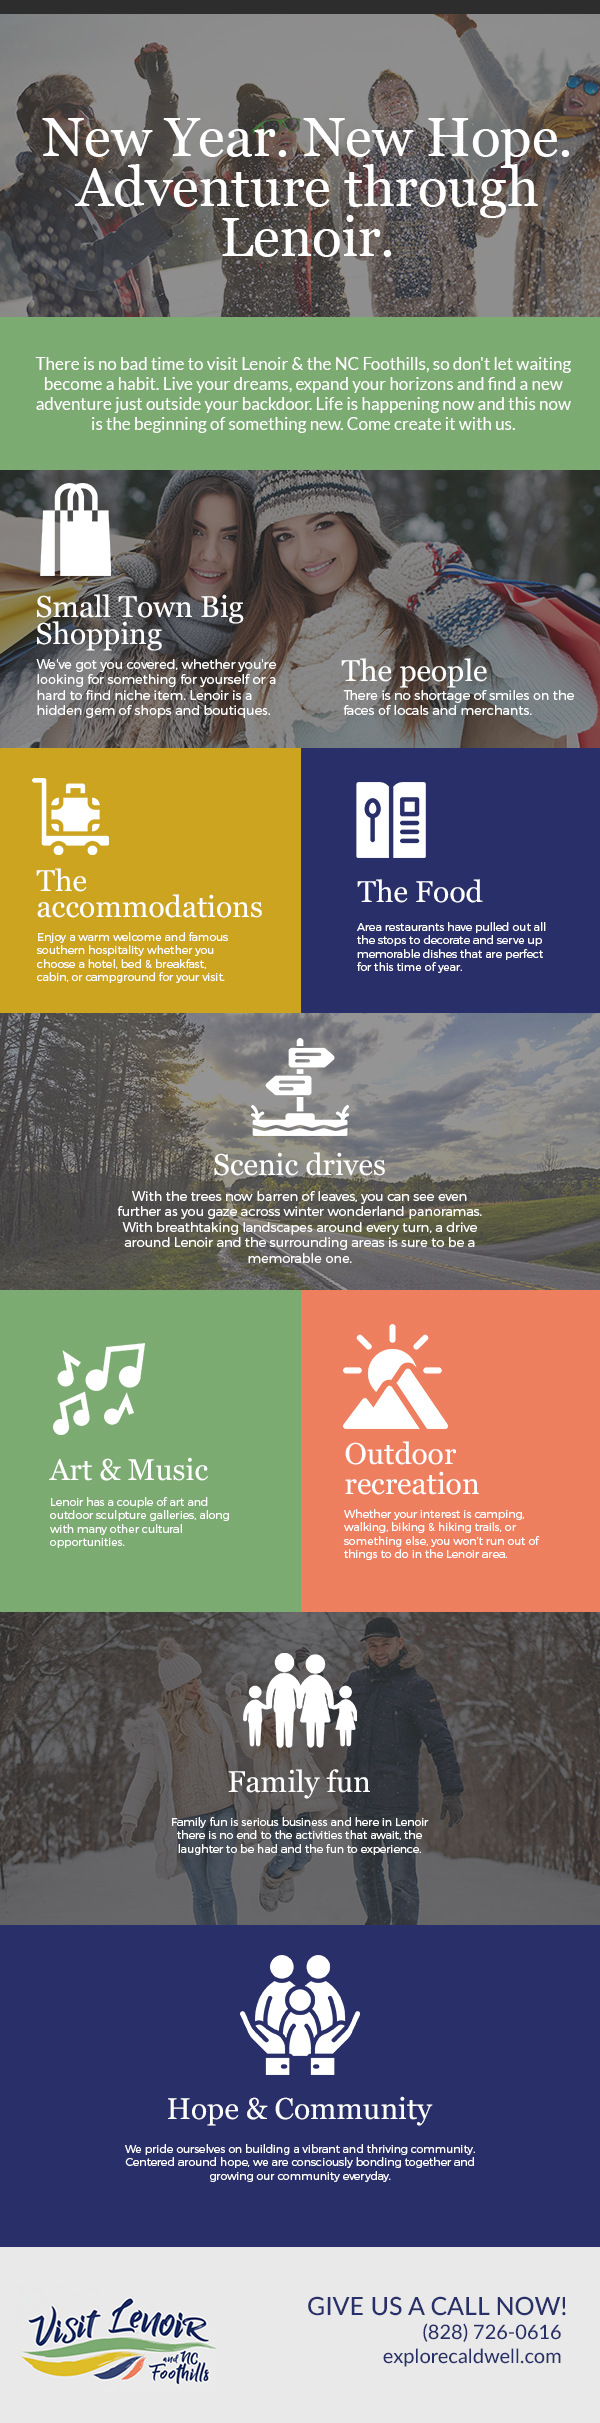 10 Reasons to Visit Lenoir in 2021 [infographic]